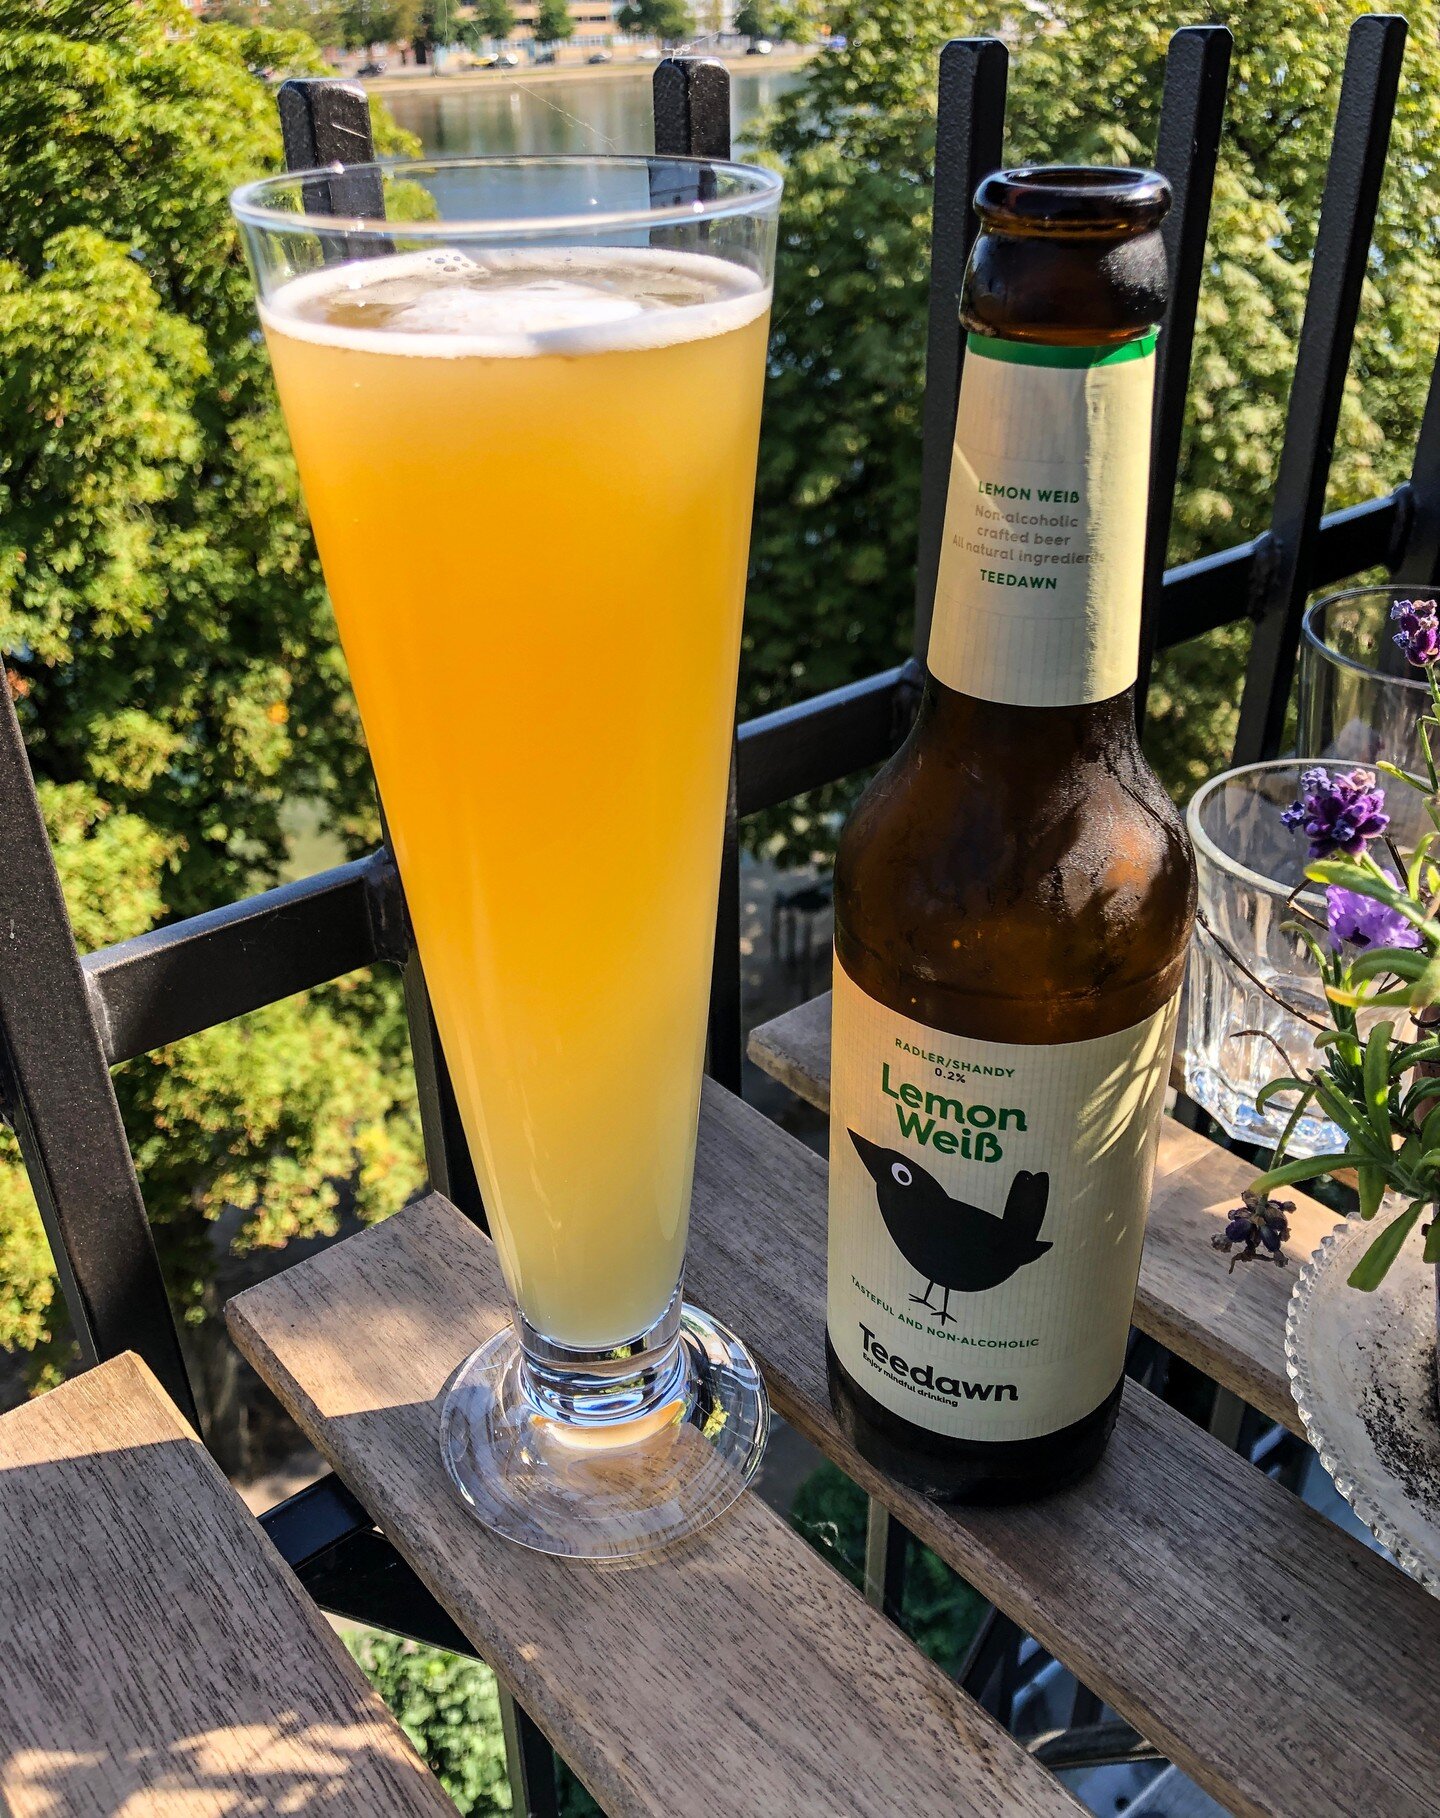 The Danish weather suits perfect for Lemon Weiß, the most perfected non-alcoholic Radler, brewed on Bavarian Castle Wheat beer and natural Citrus lemonade. Enjoy. 
#lemonweiß #lemonweisse #radler #nonalcoholic